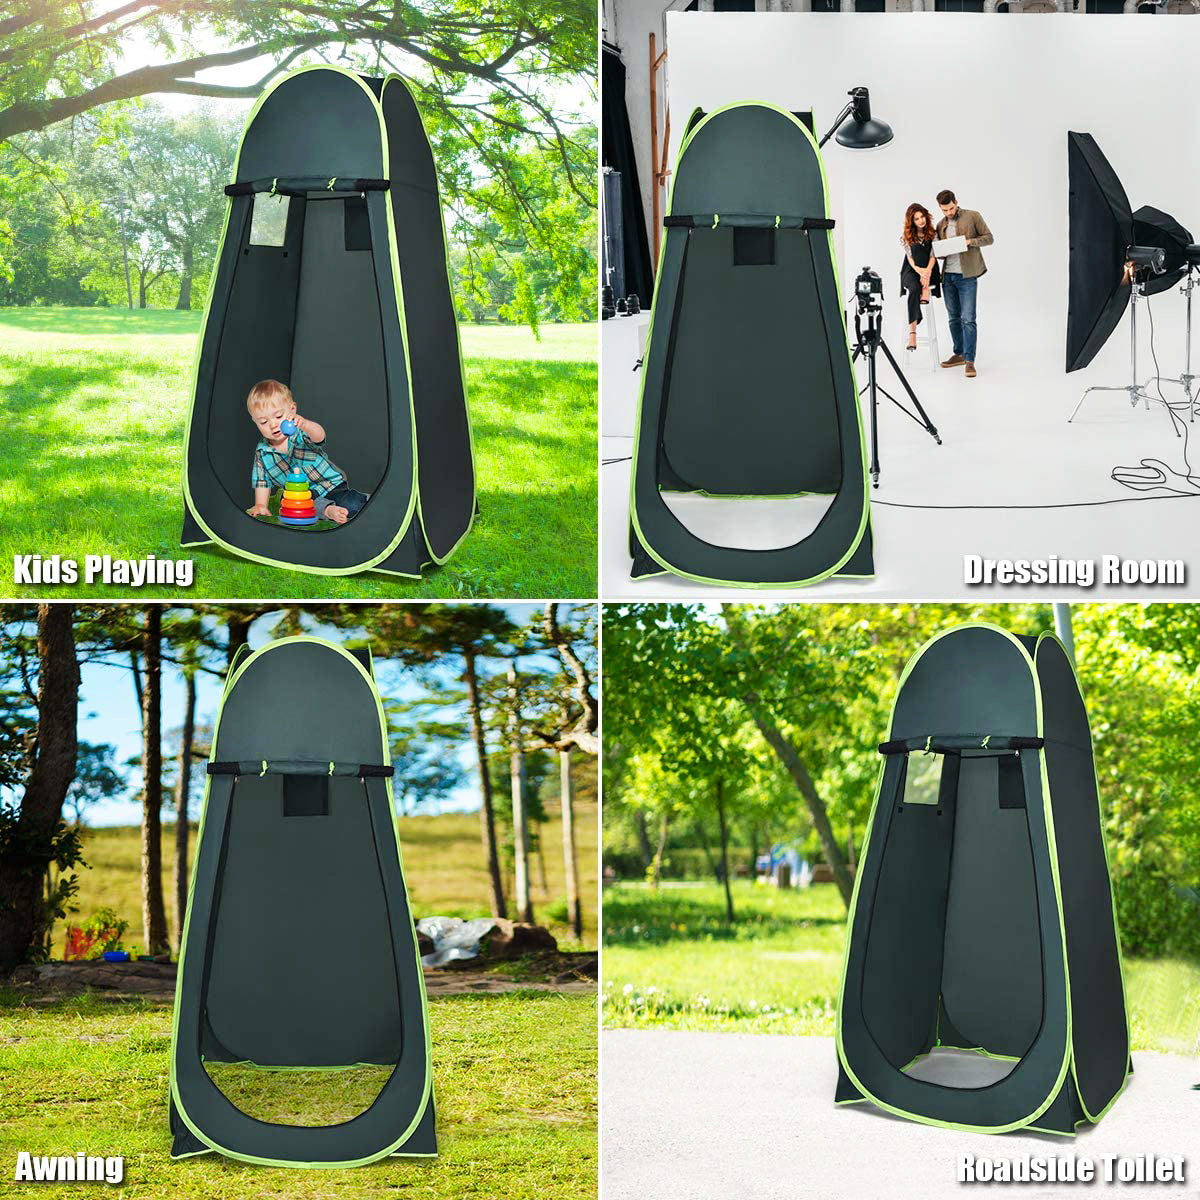 Portable Pop Up Privacy Shower Toilet Camping Tent